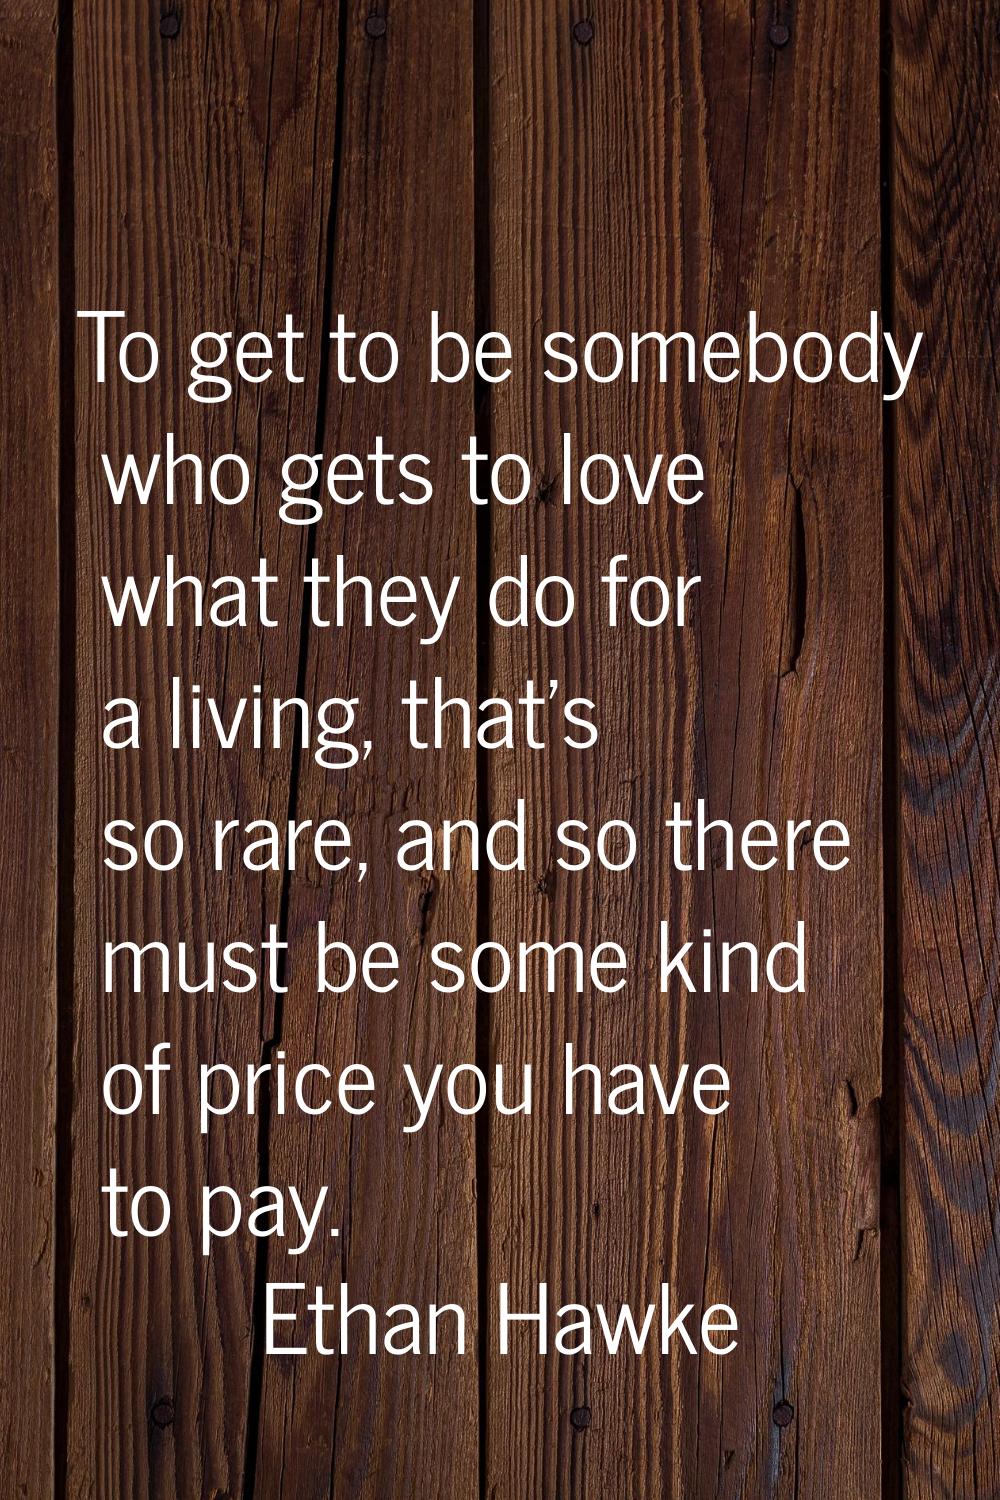 To get to be somebody who gets to love what they do for a living, that's so rare, and so there must